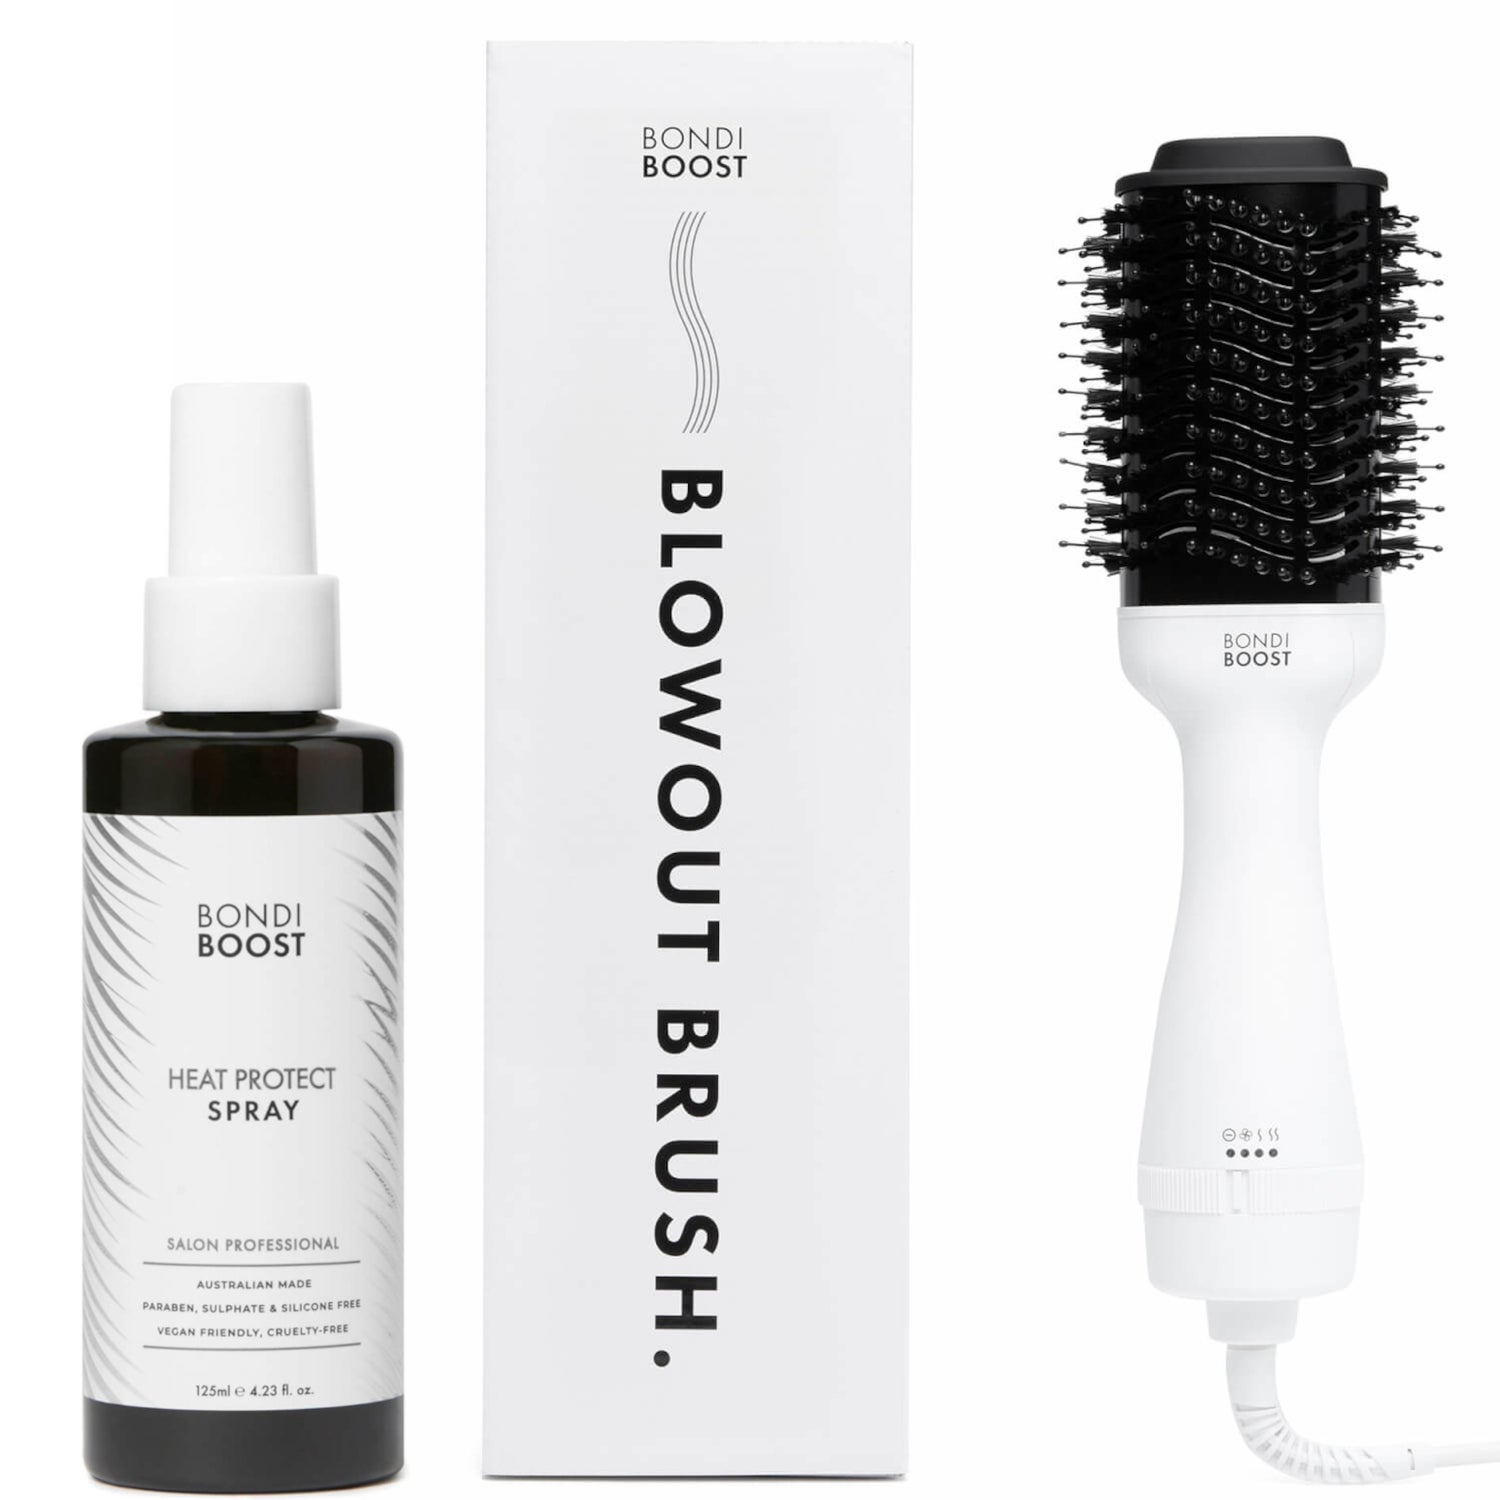 BondiBoost Blow out 75mm Brush and Heat Protect Spray 125ml Bundle